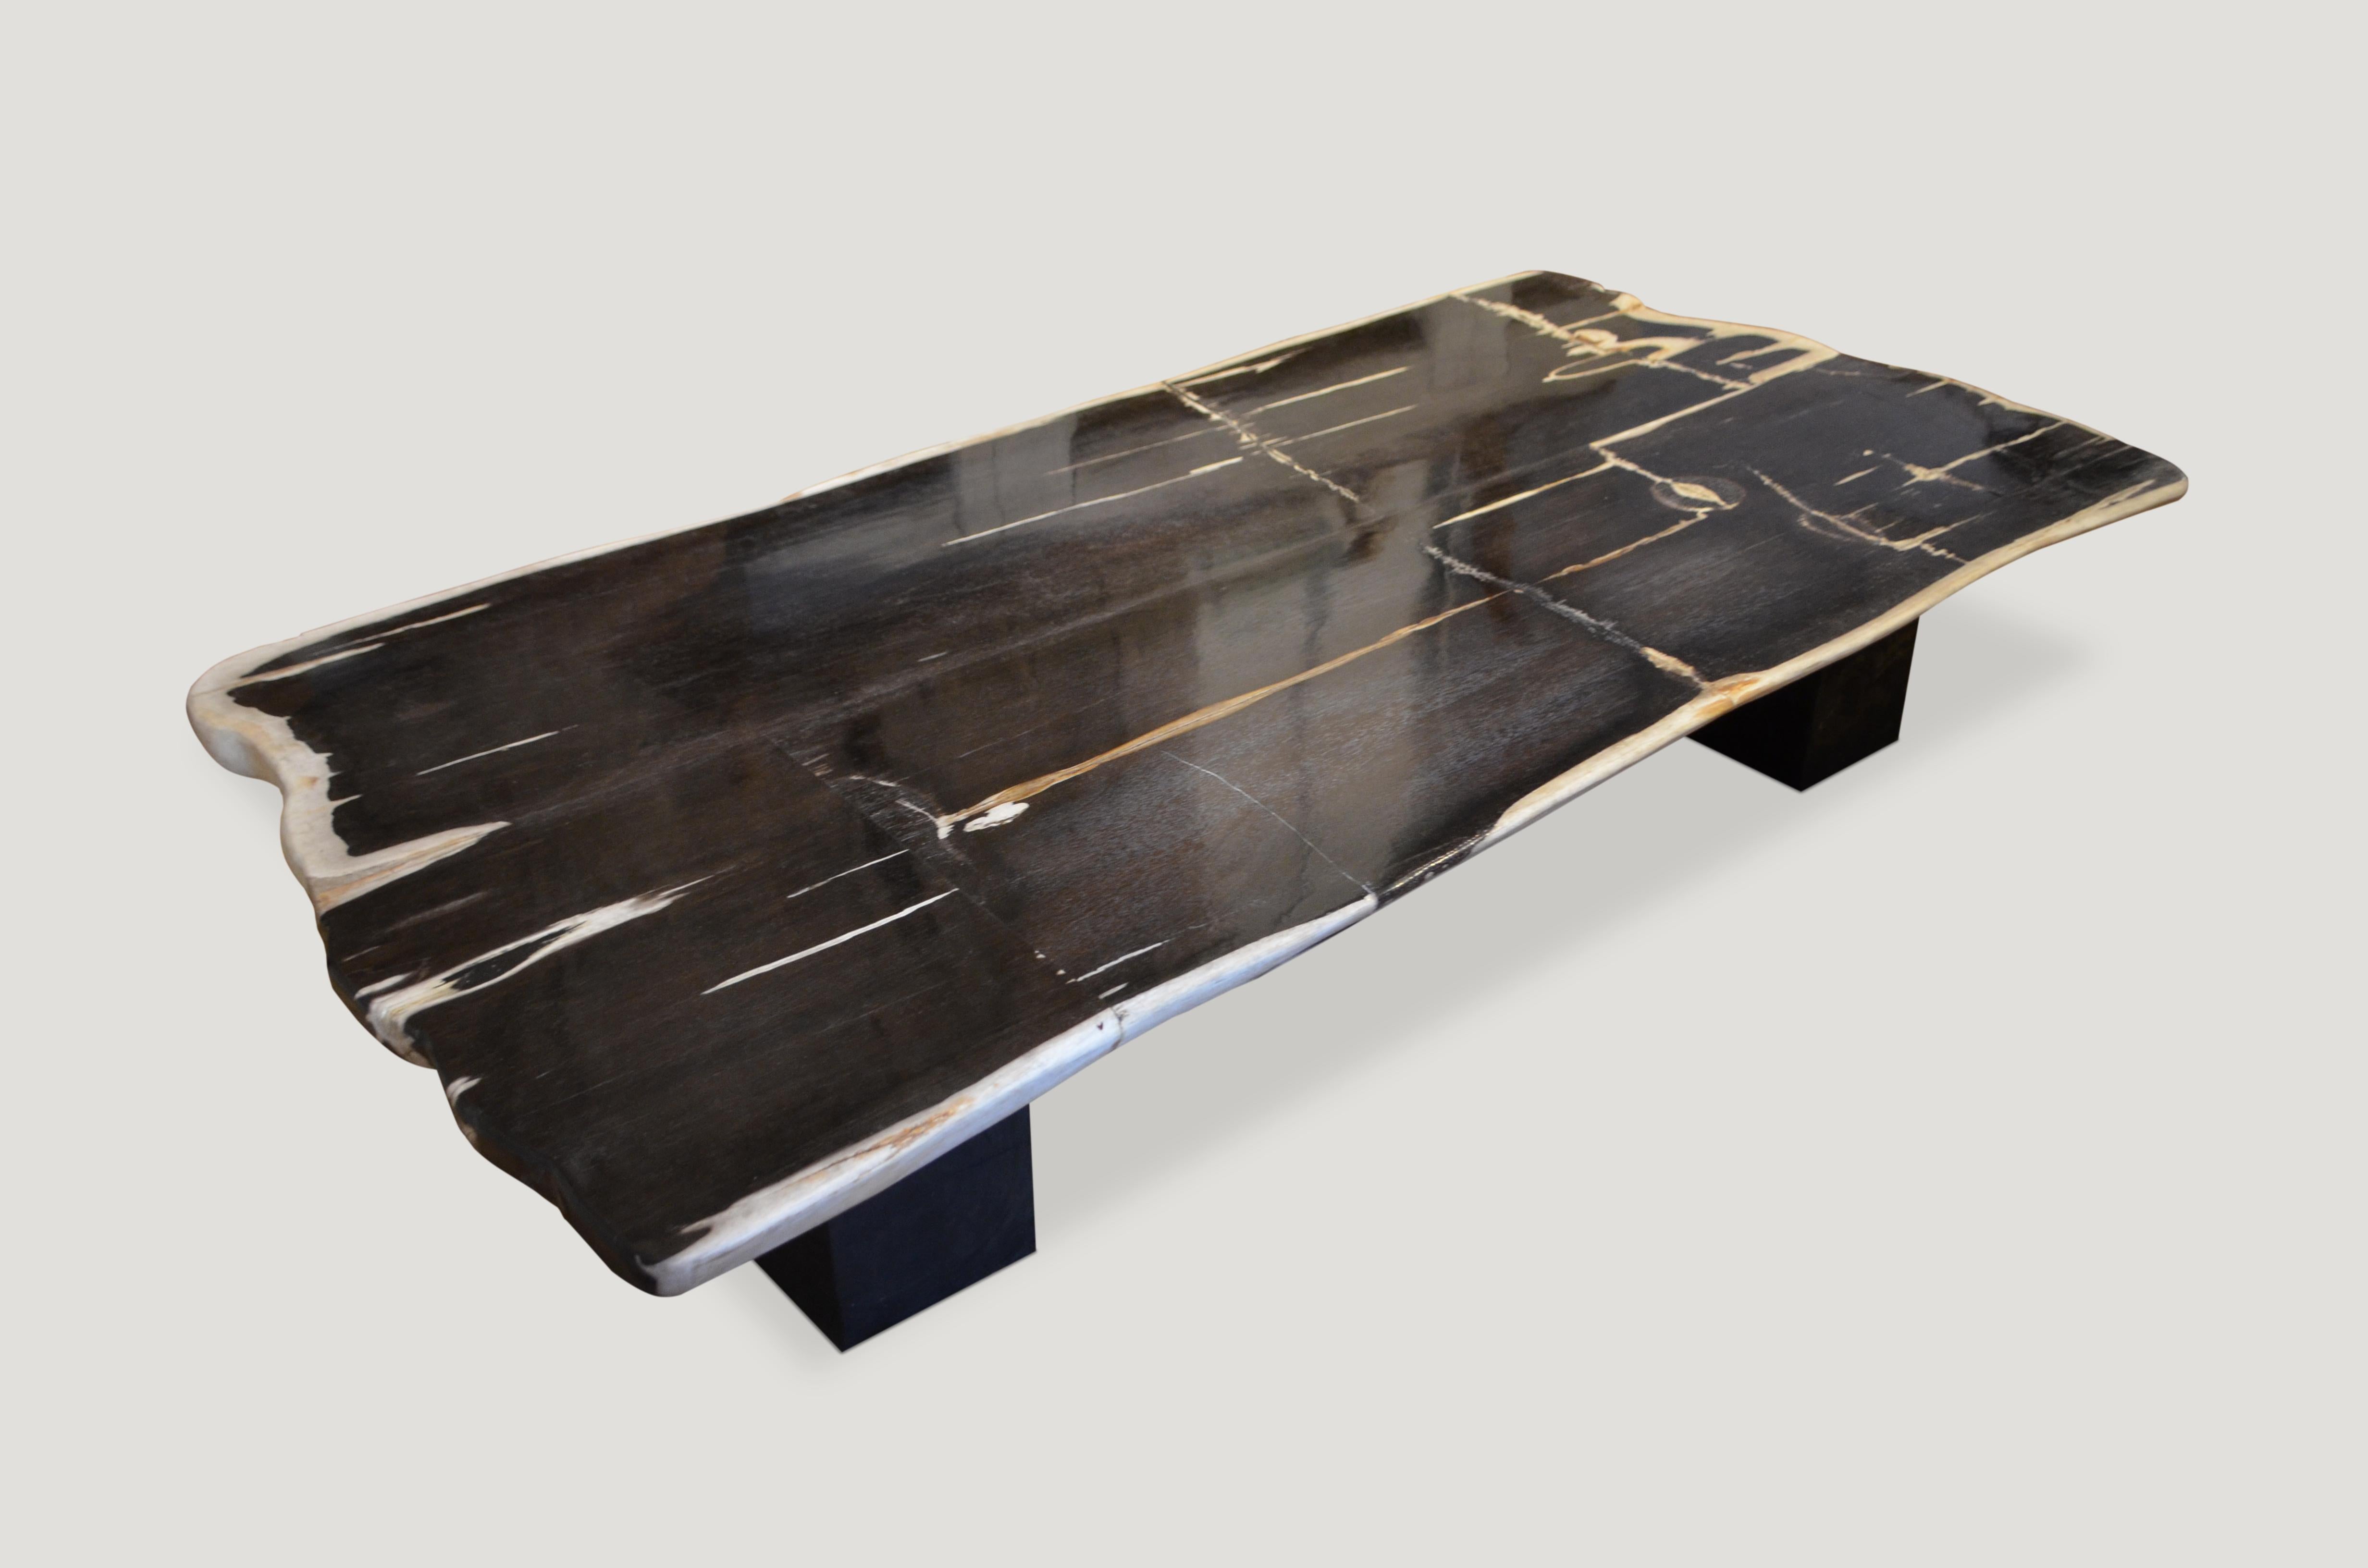 High quality super smooth petrified wood coffee table, dining table or counter top. Stunning black and white, charcoal grey and natural tones make this an impressive piece for any space. This two inch thick slab is shown floating on two espresso